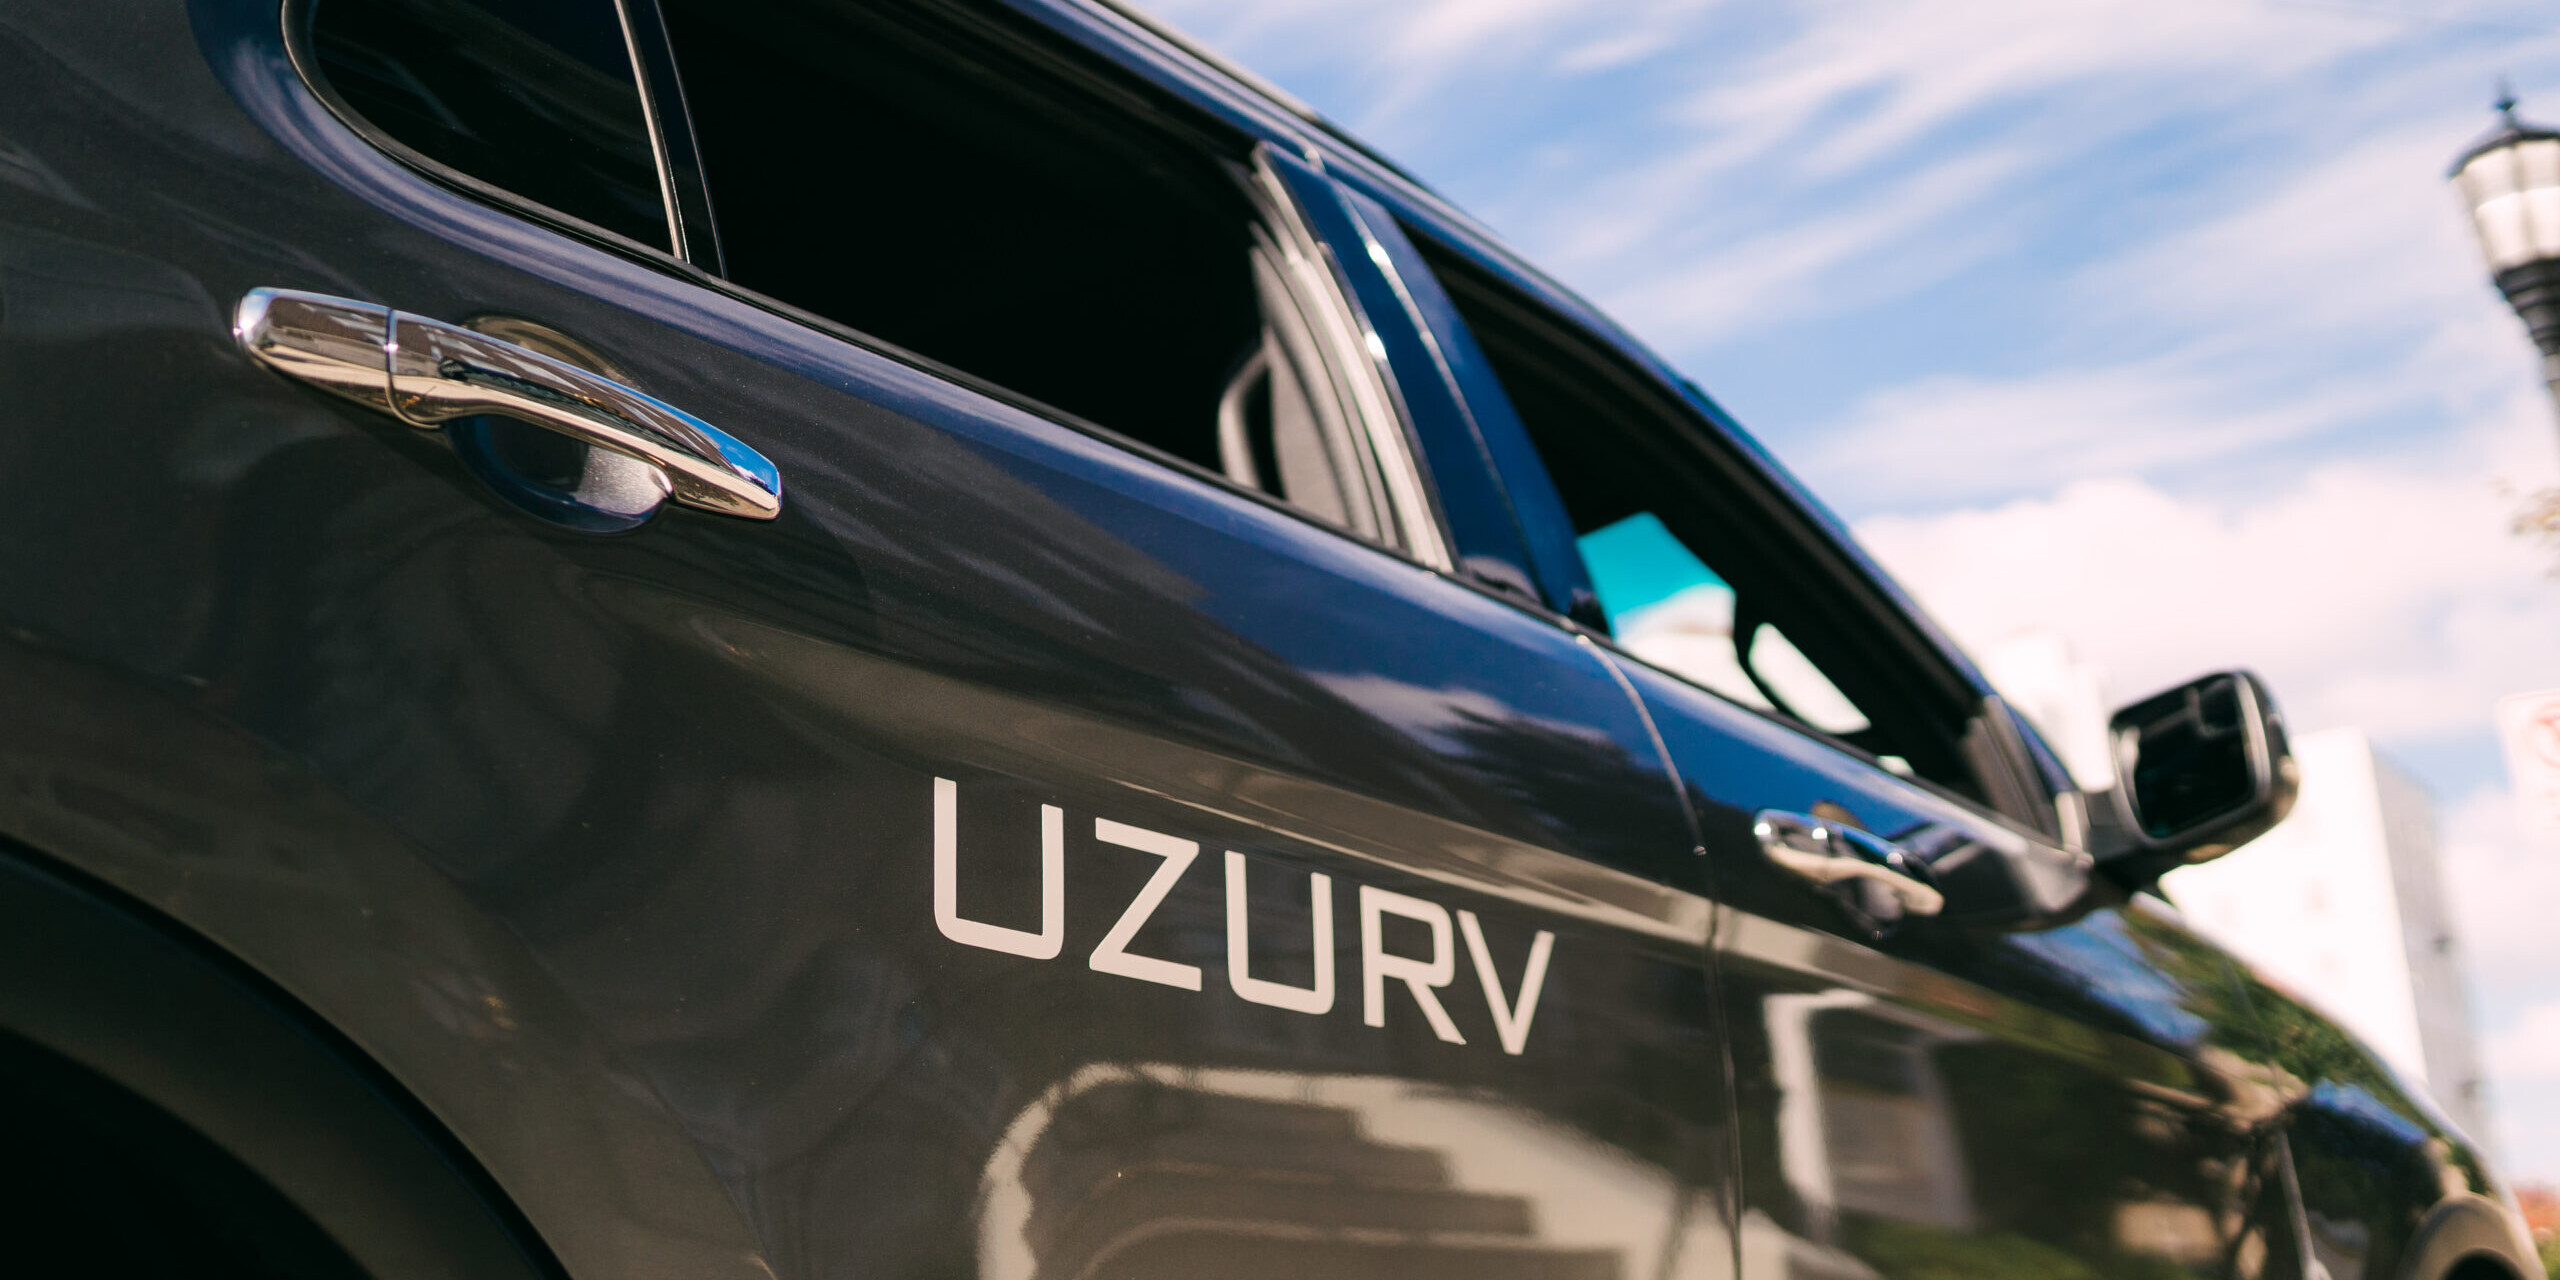 Silver vehicle with the UZURV logo on the back door.